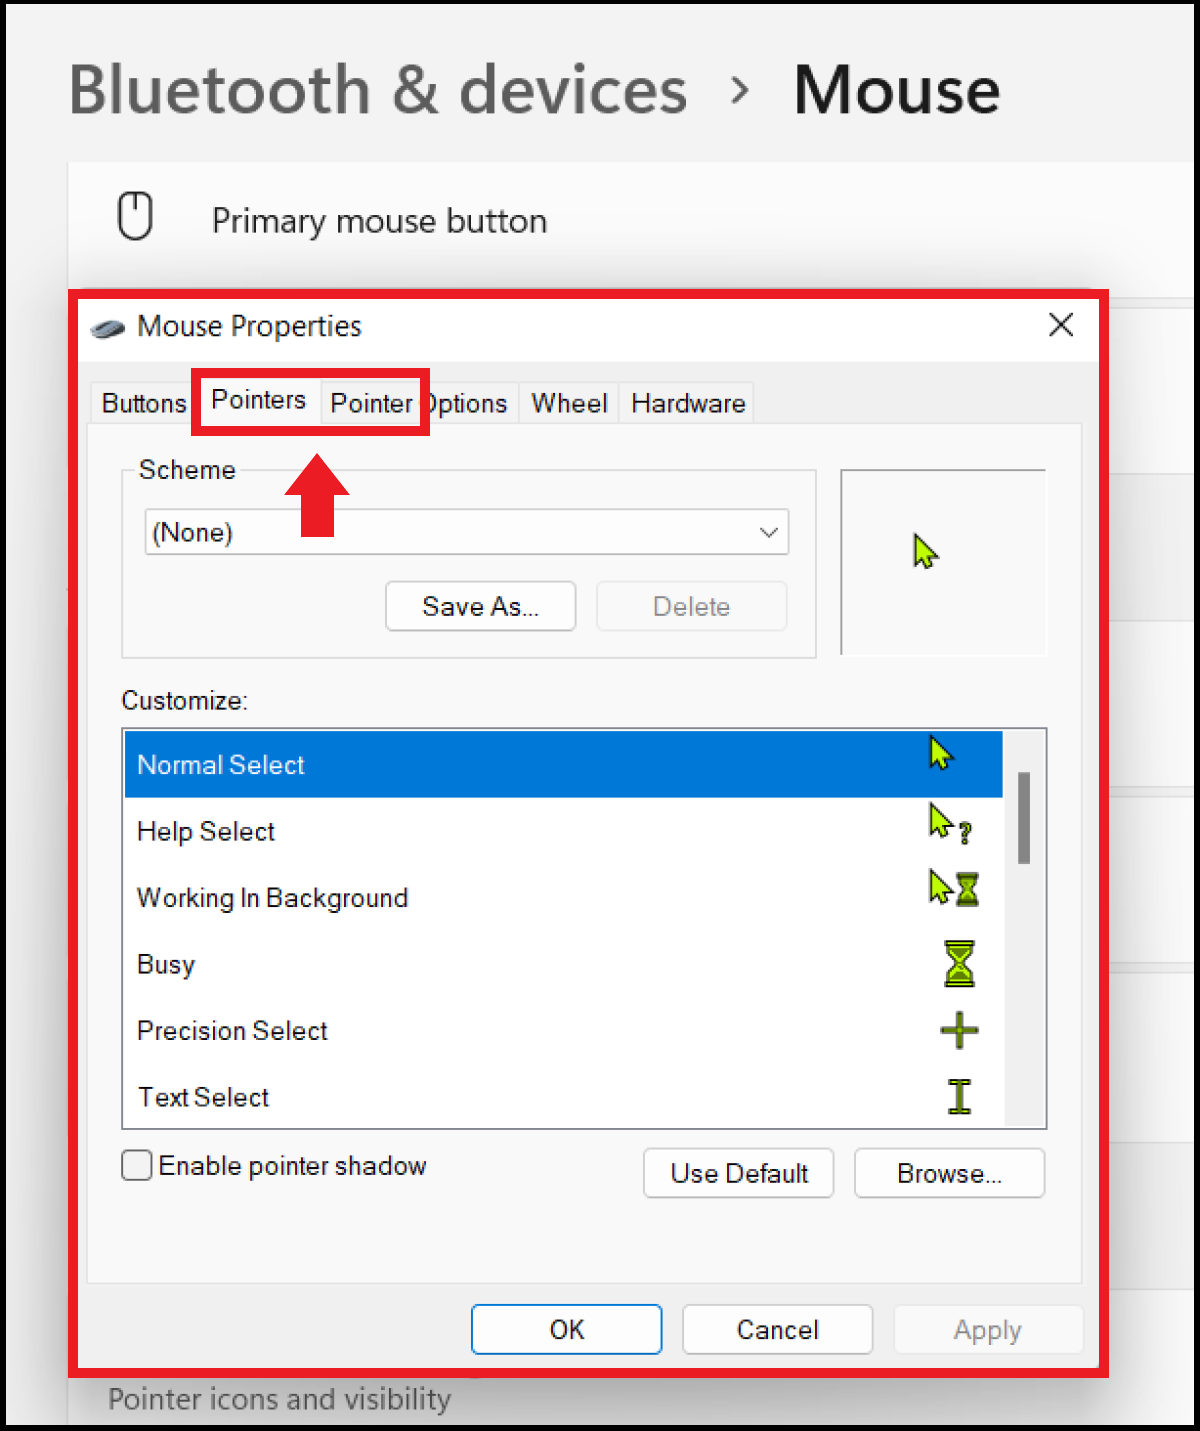 How to Change Your Mouse Cursor on Windows 11